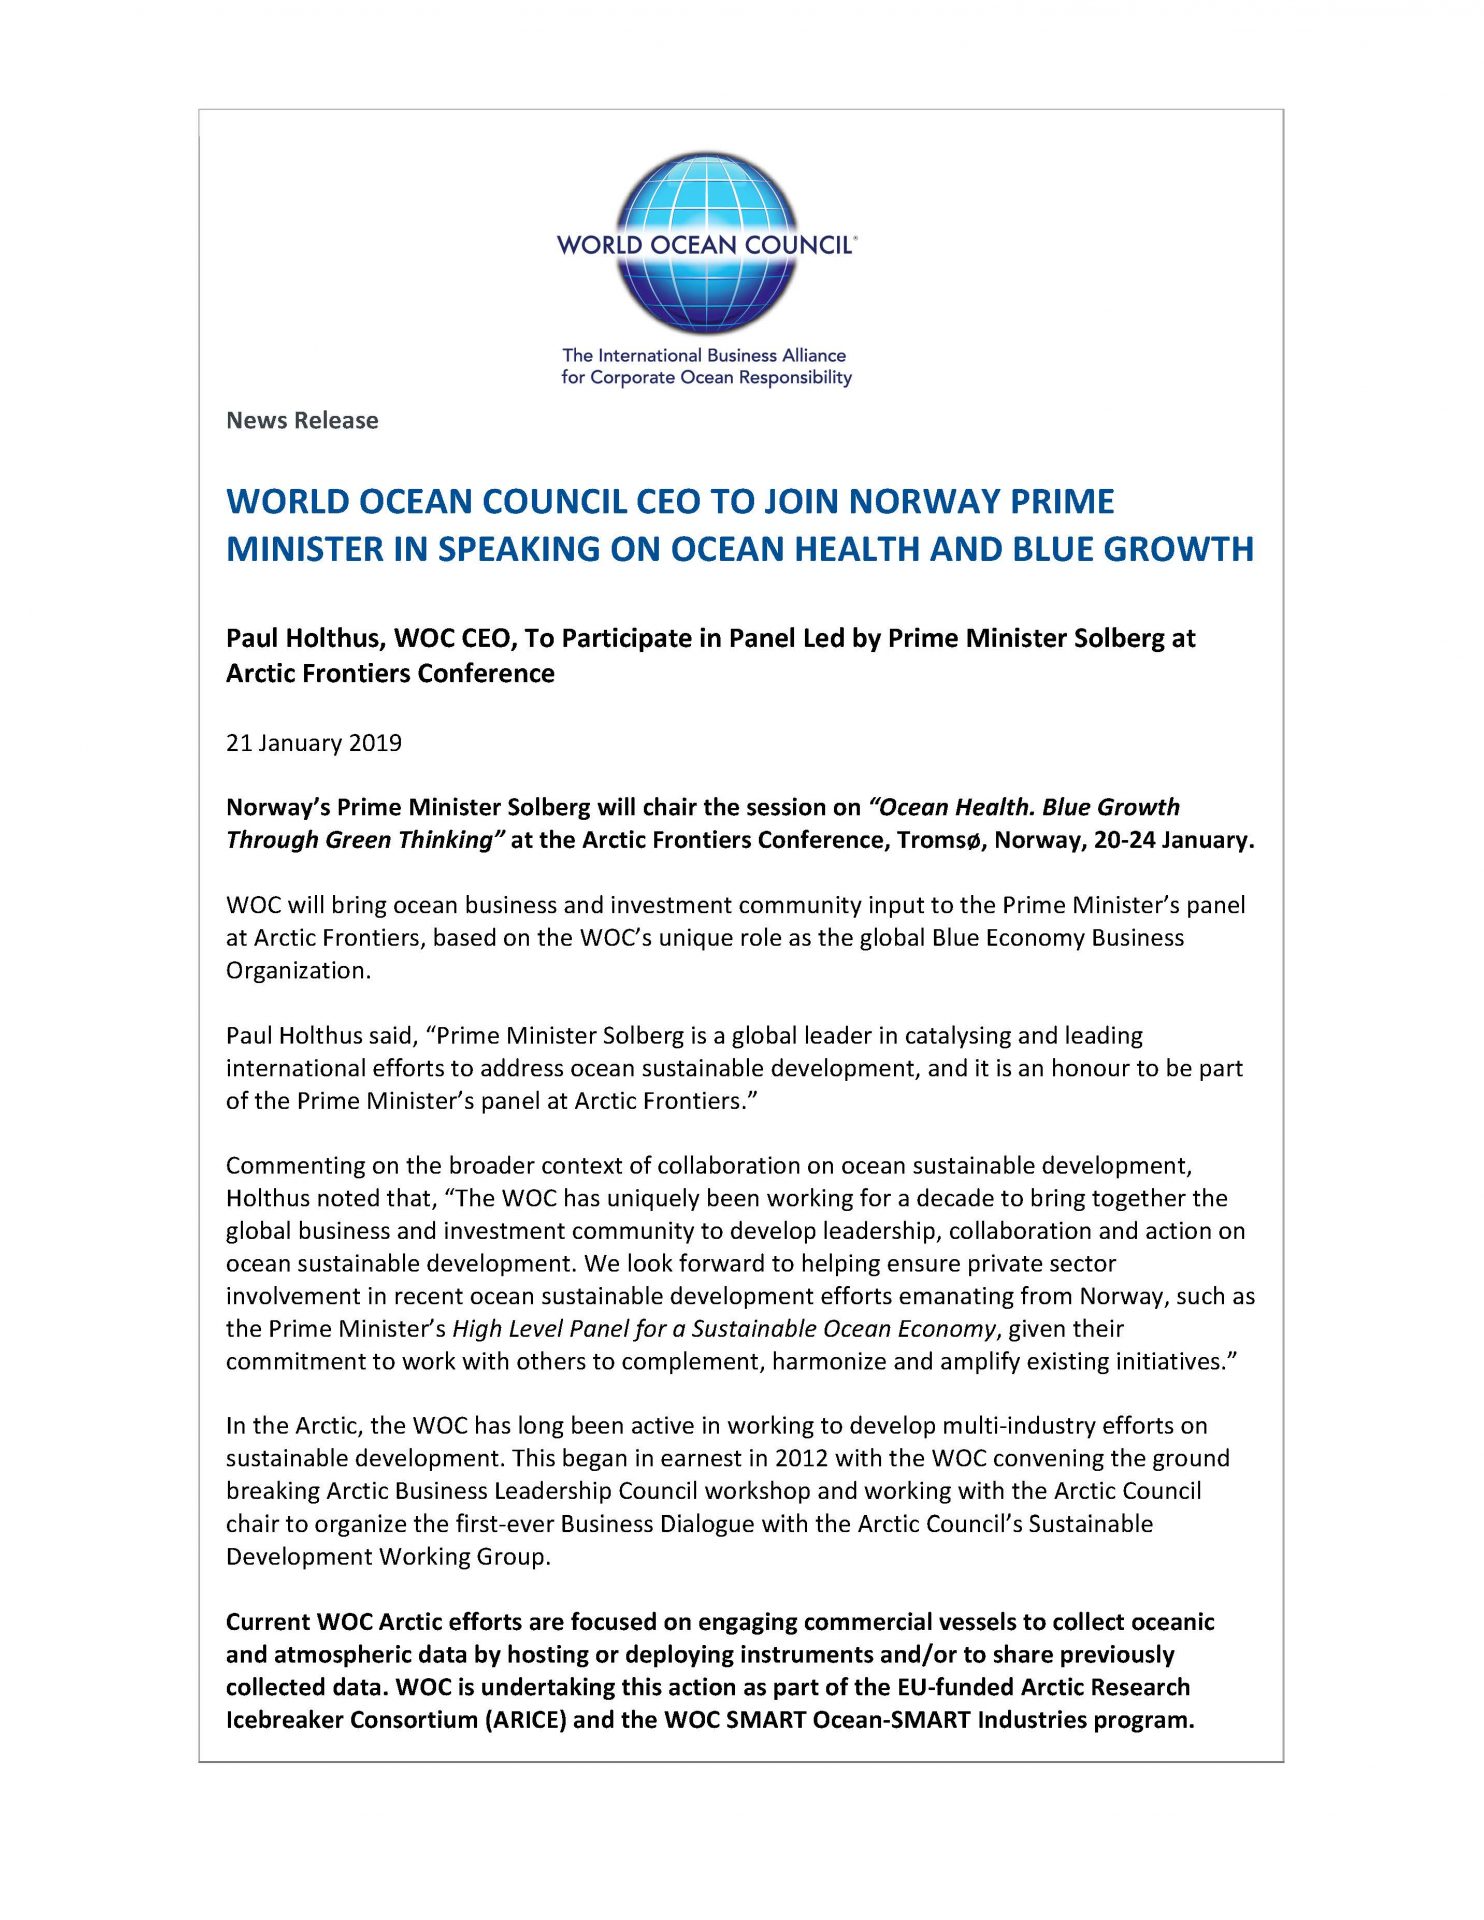 World Ocean Council CEO to Join Norway Prime Minister in Speaking on Ocean Health and Blue Growth - 21 January 2019